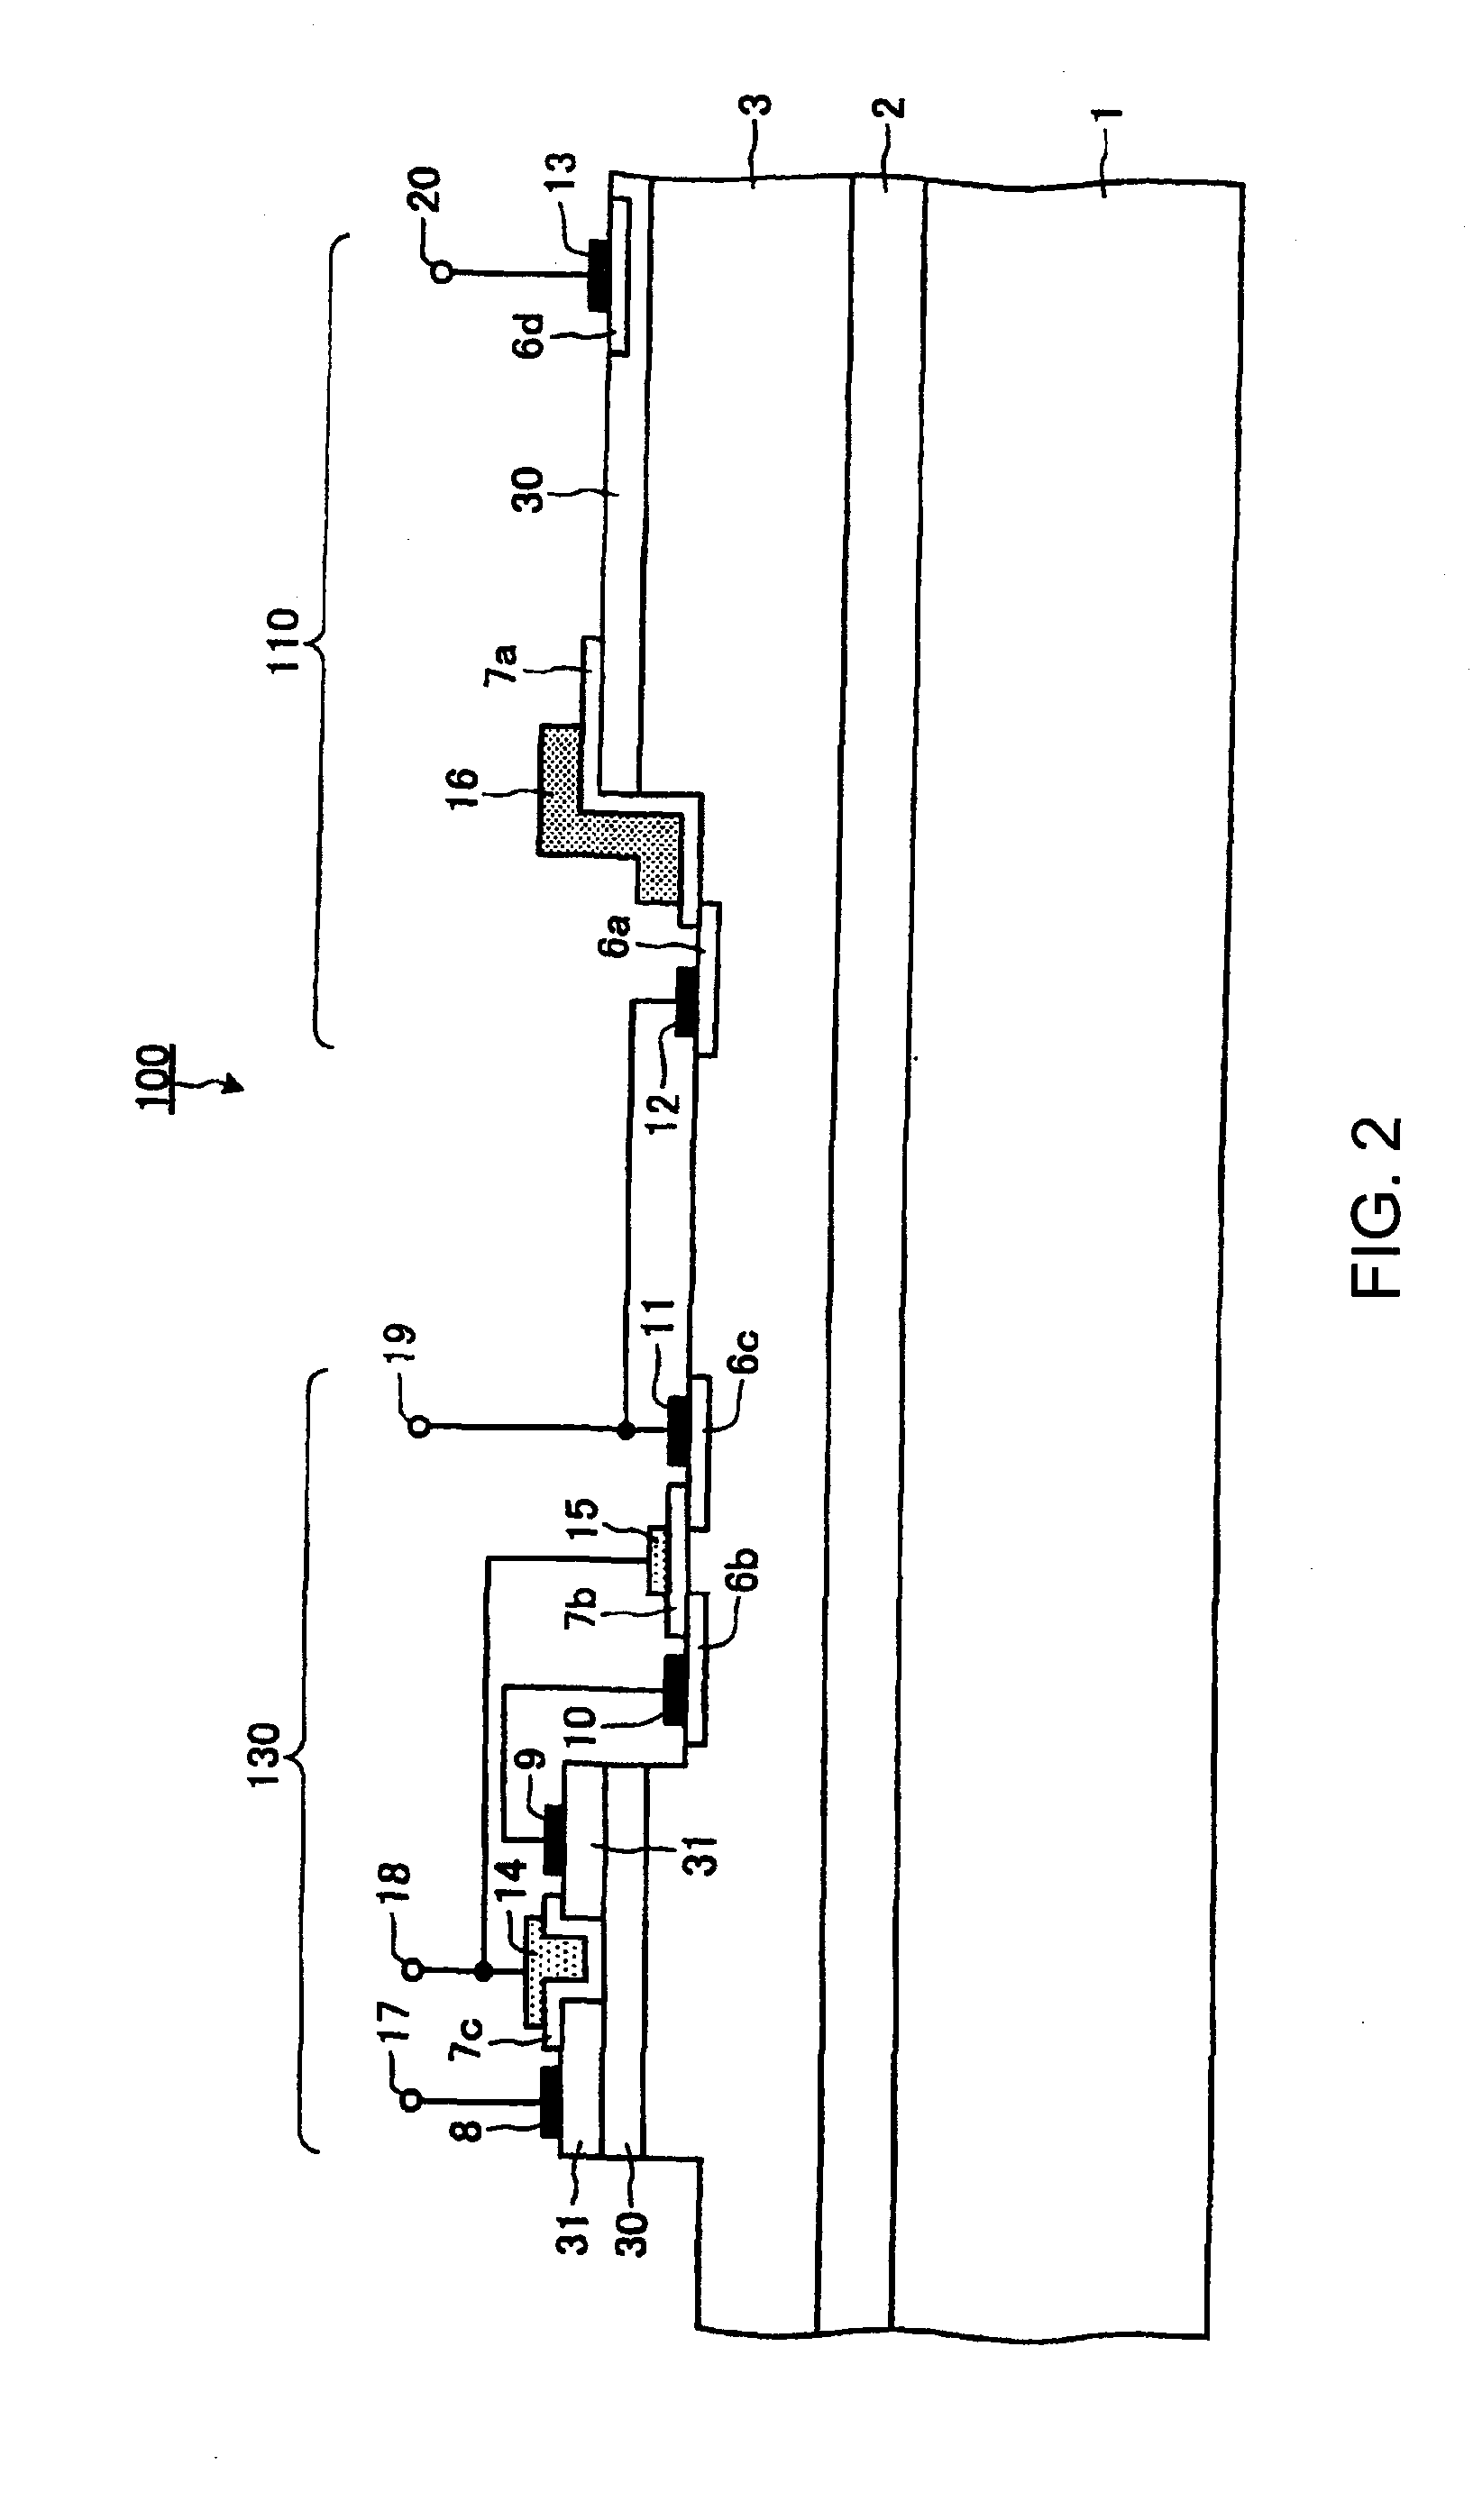 Gallium nitride semiconductor device and method for producing the same